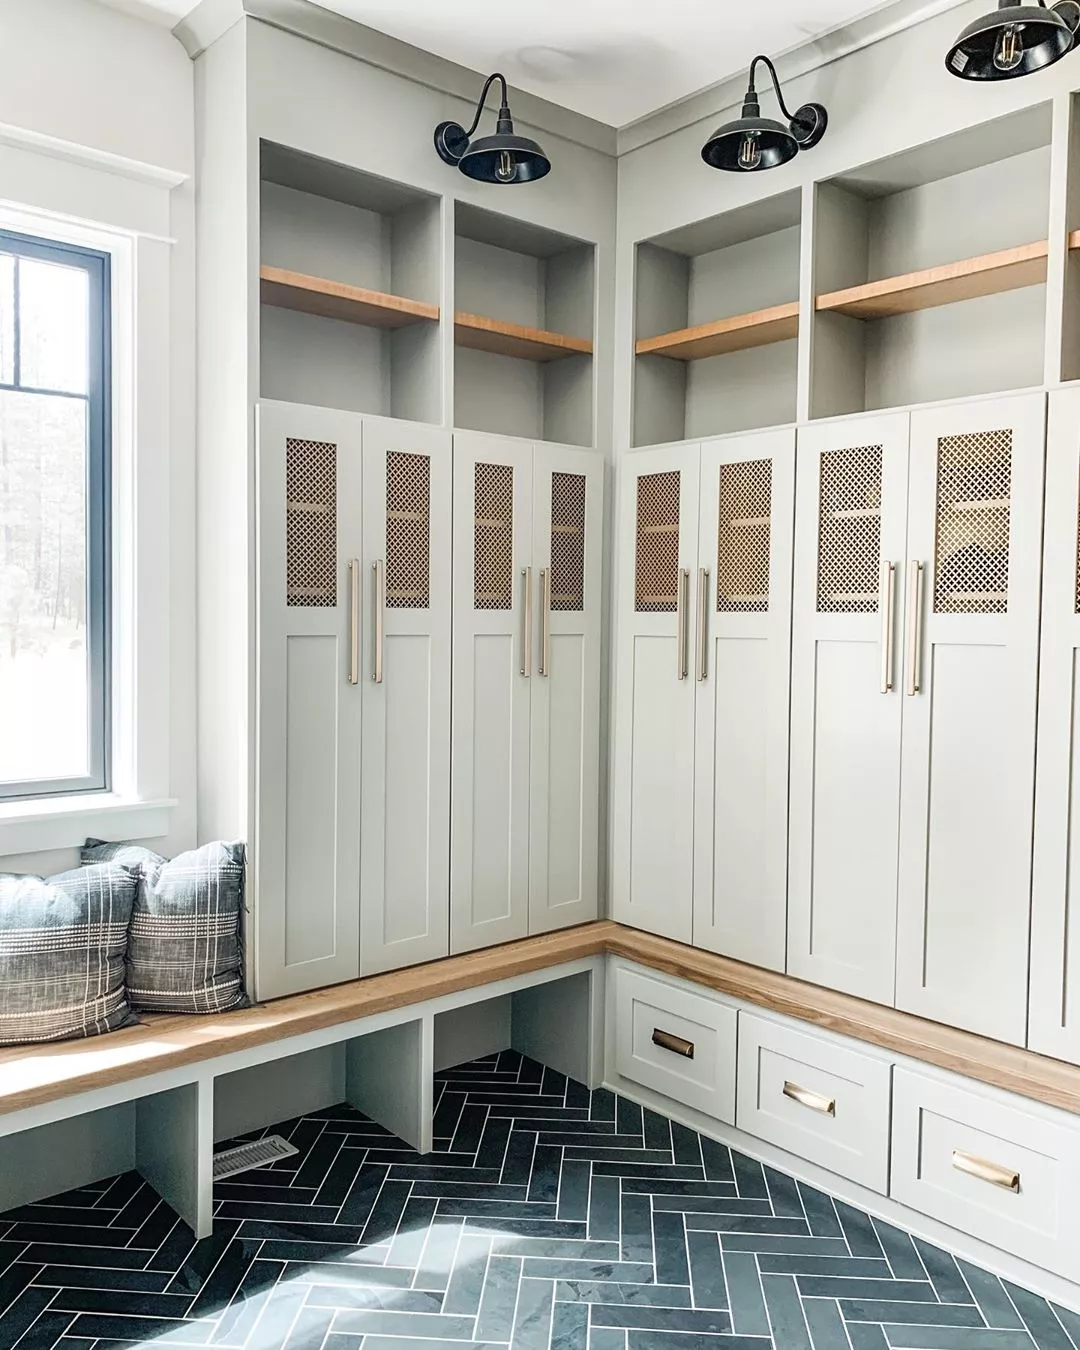 41 Mudroom Ideas With Creative Storage Solutions